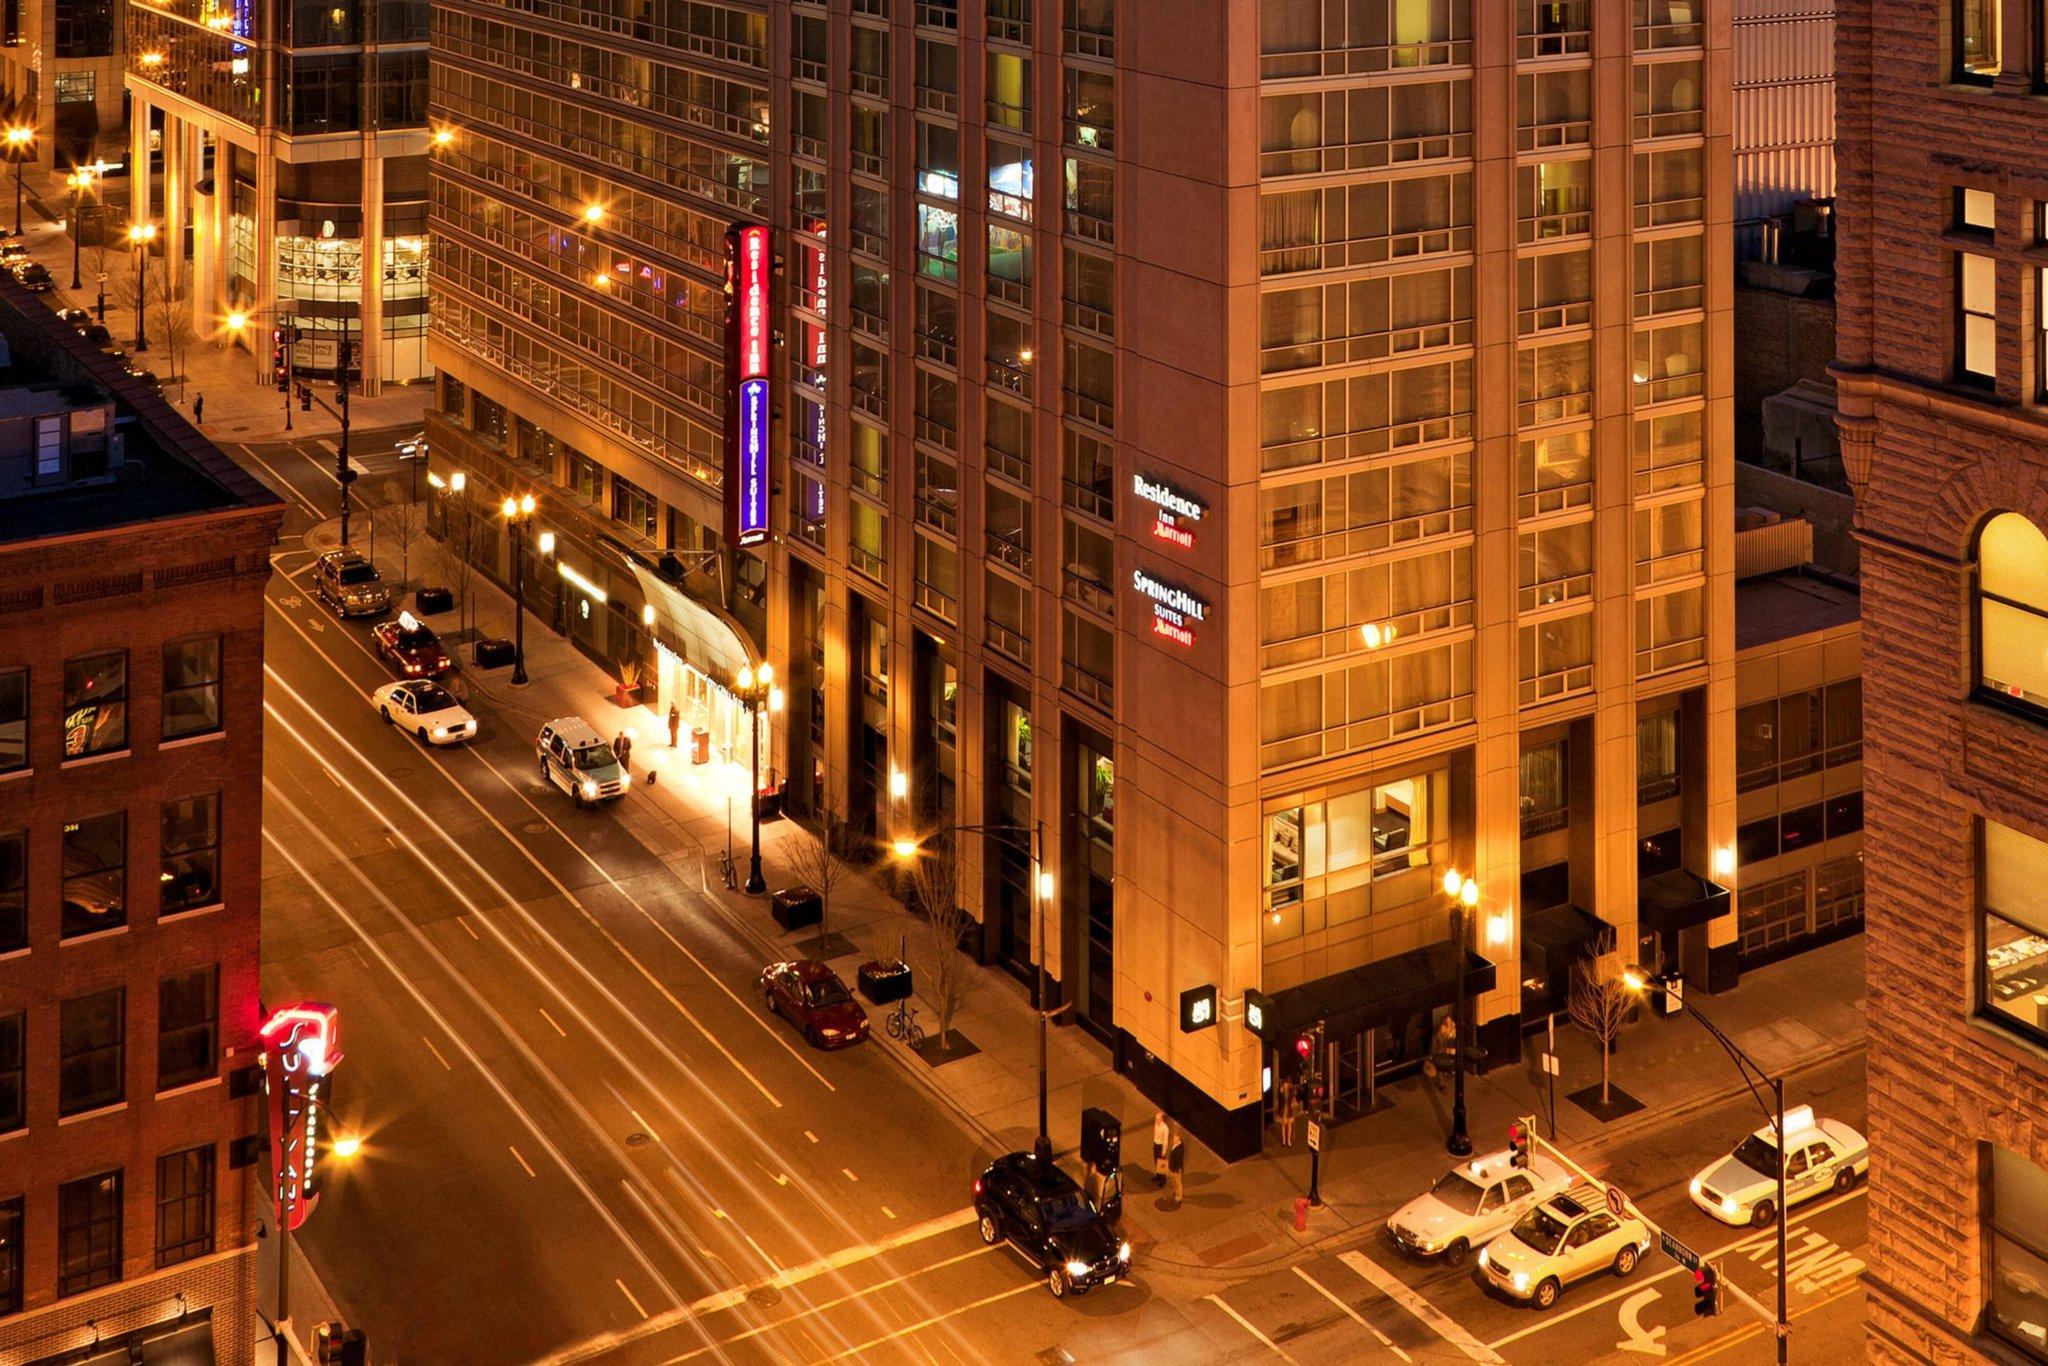 Residence Inn Chicago Downtown/River North in Chicago, IL